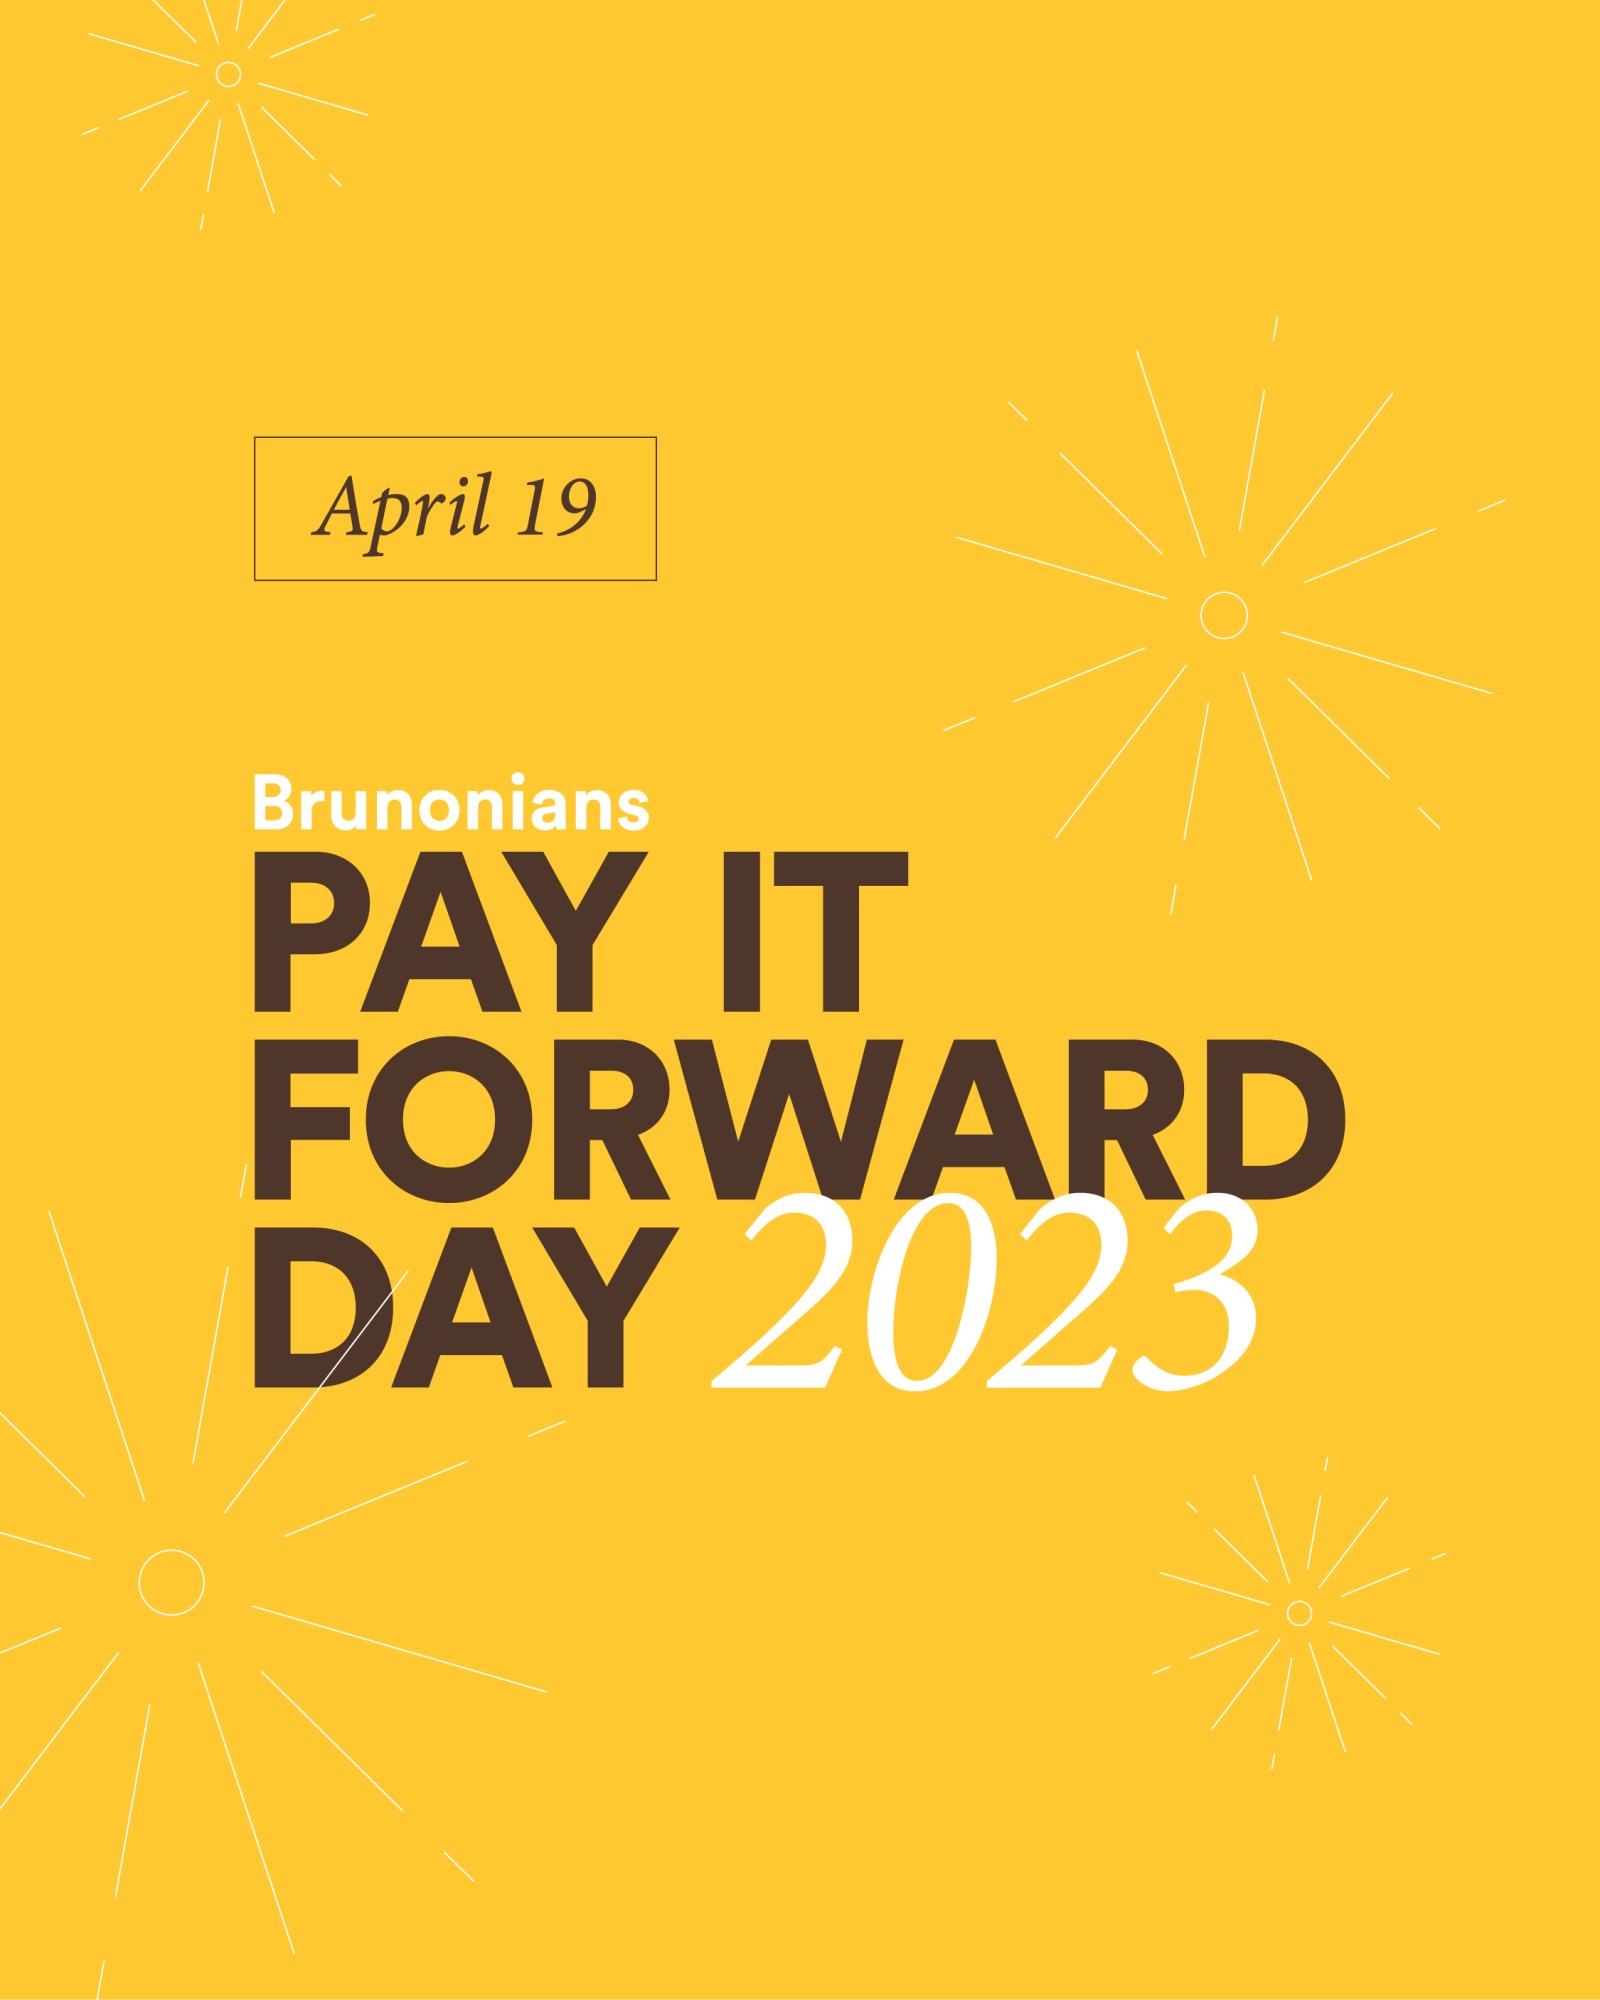 Brunonians Pay It Forward Day graphic for social with yellow background and white fireworks